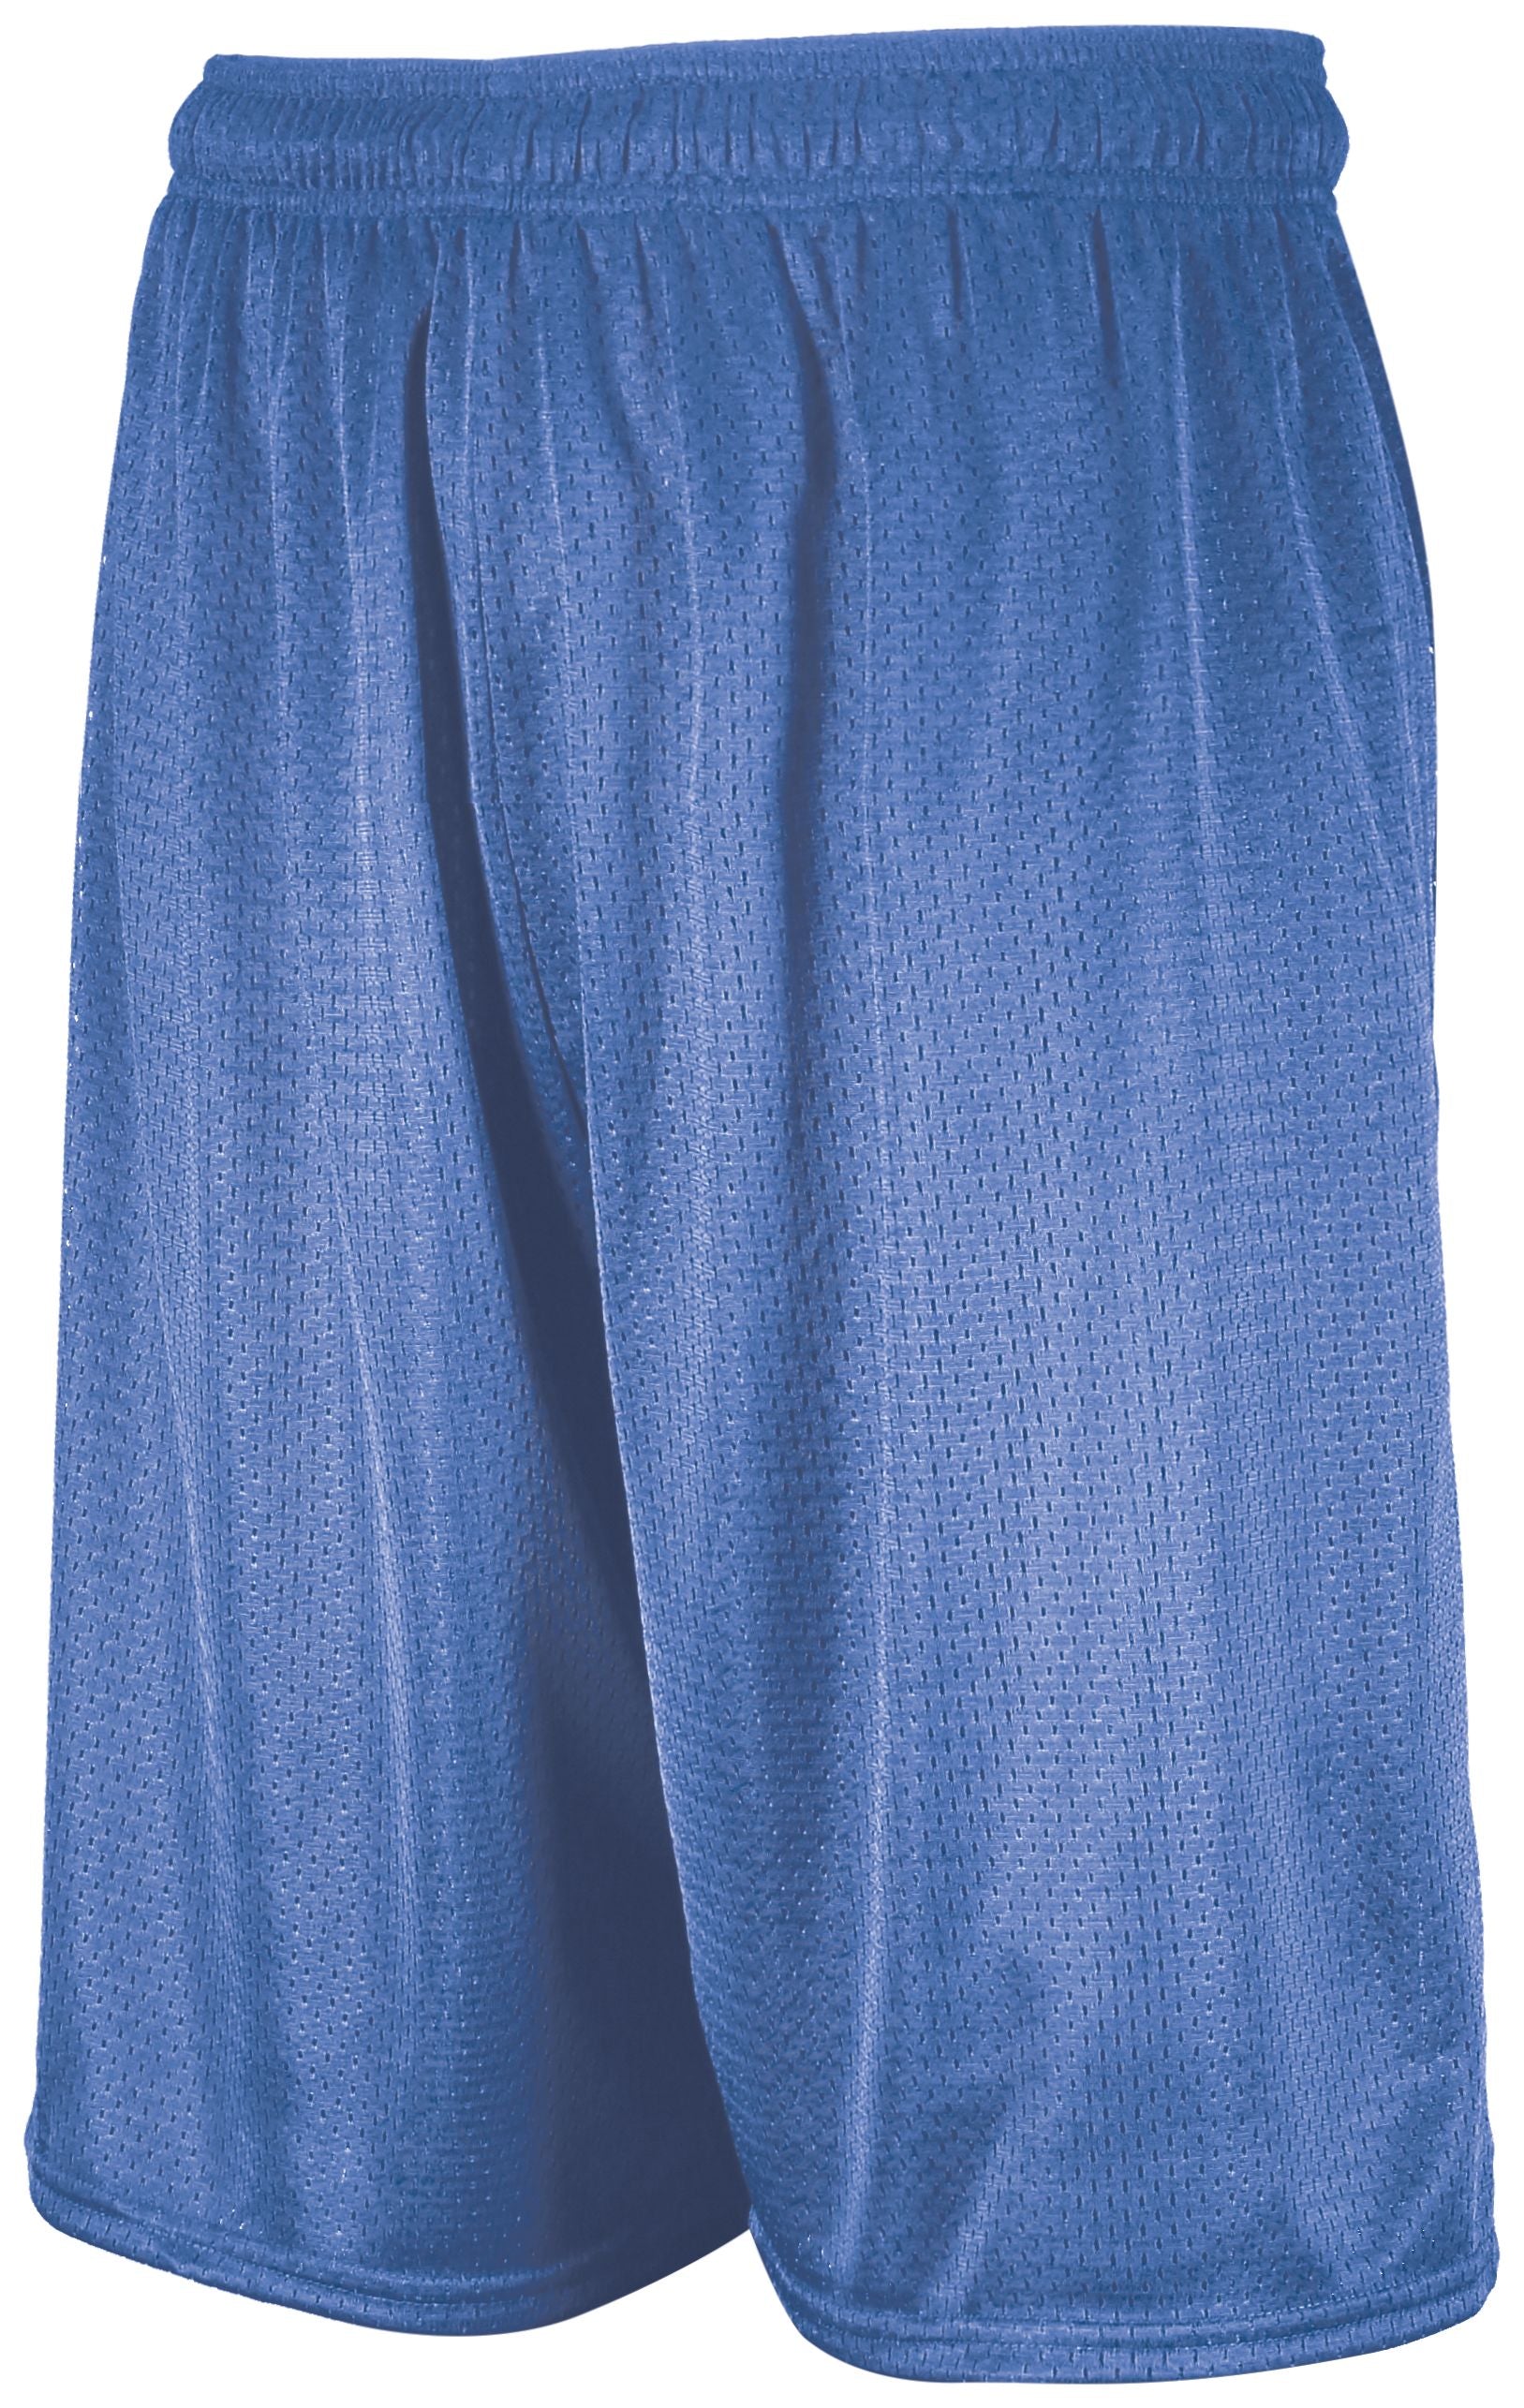 Russell Athletic Dri-Power Mesh Shorts in Columbia Blue  -Part of the Adult, Adult-Shorts, Russell-Athletic-Products product lines at KanaleyCreations.com